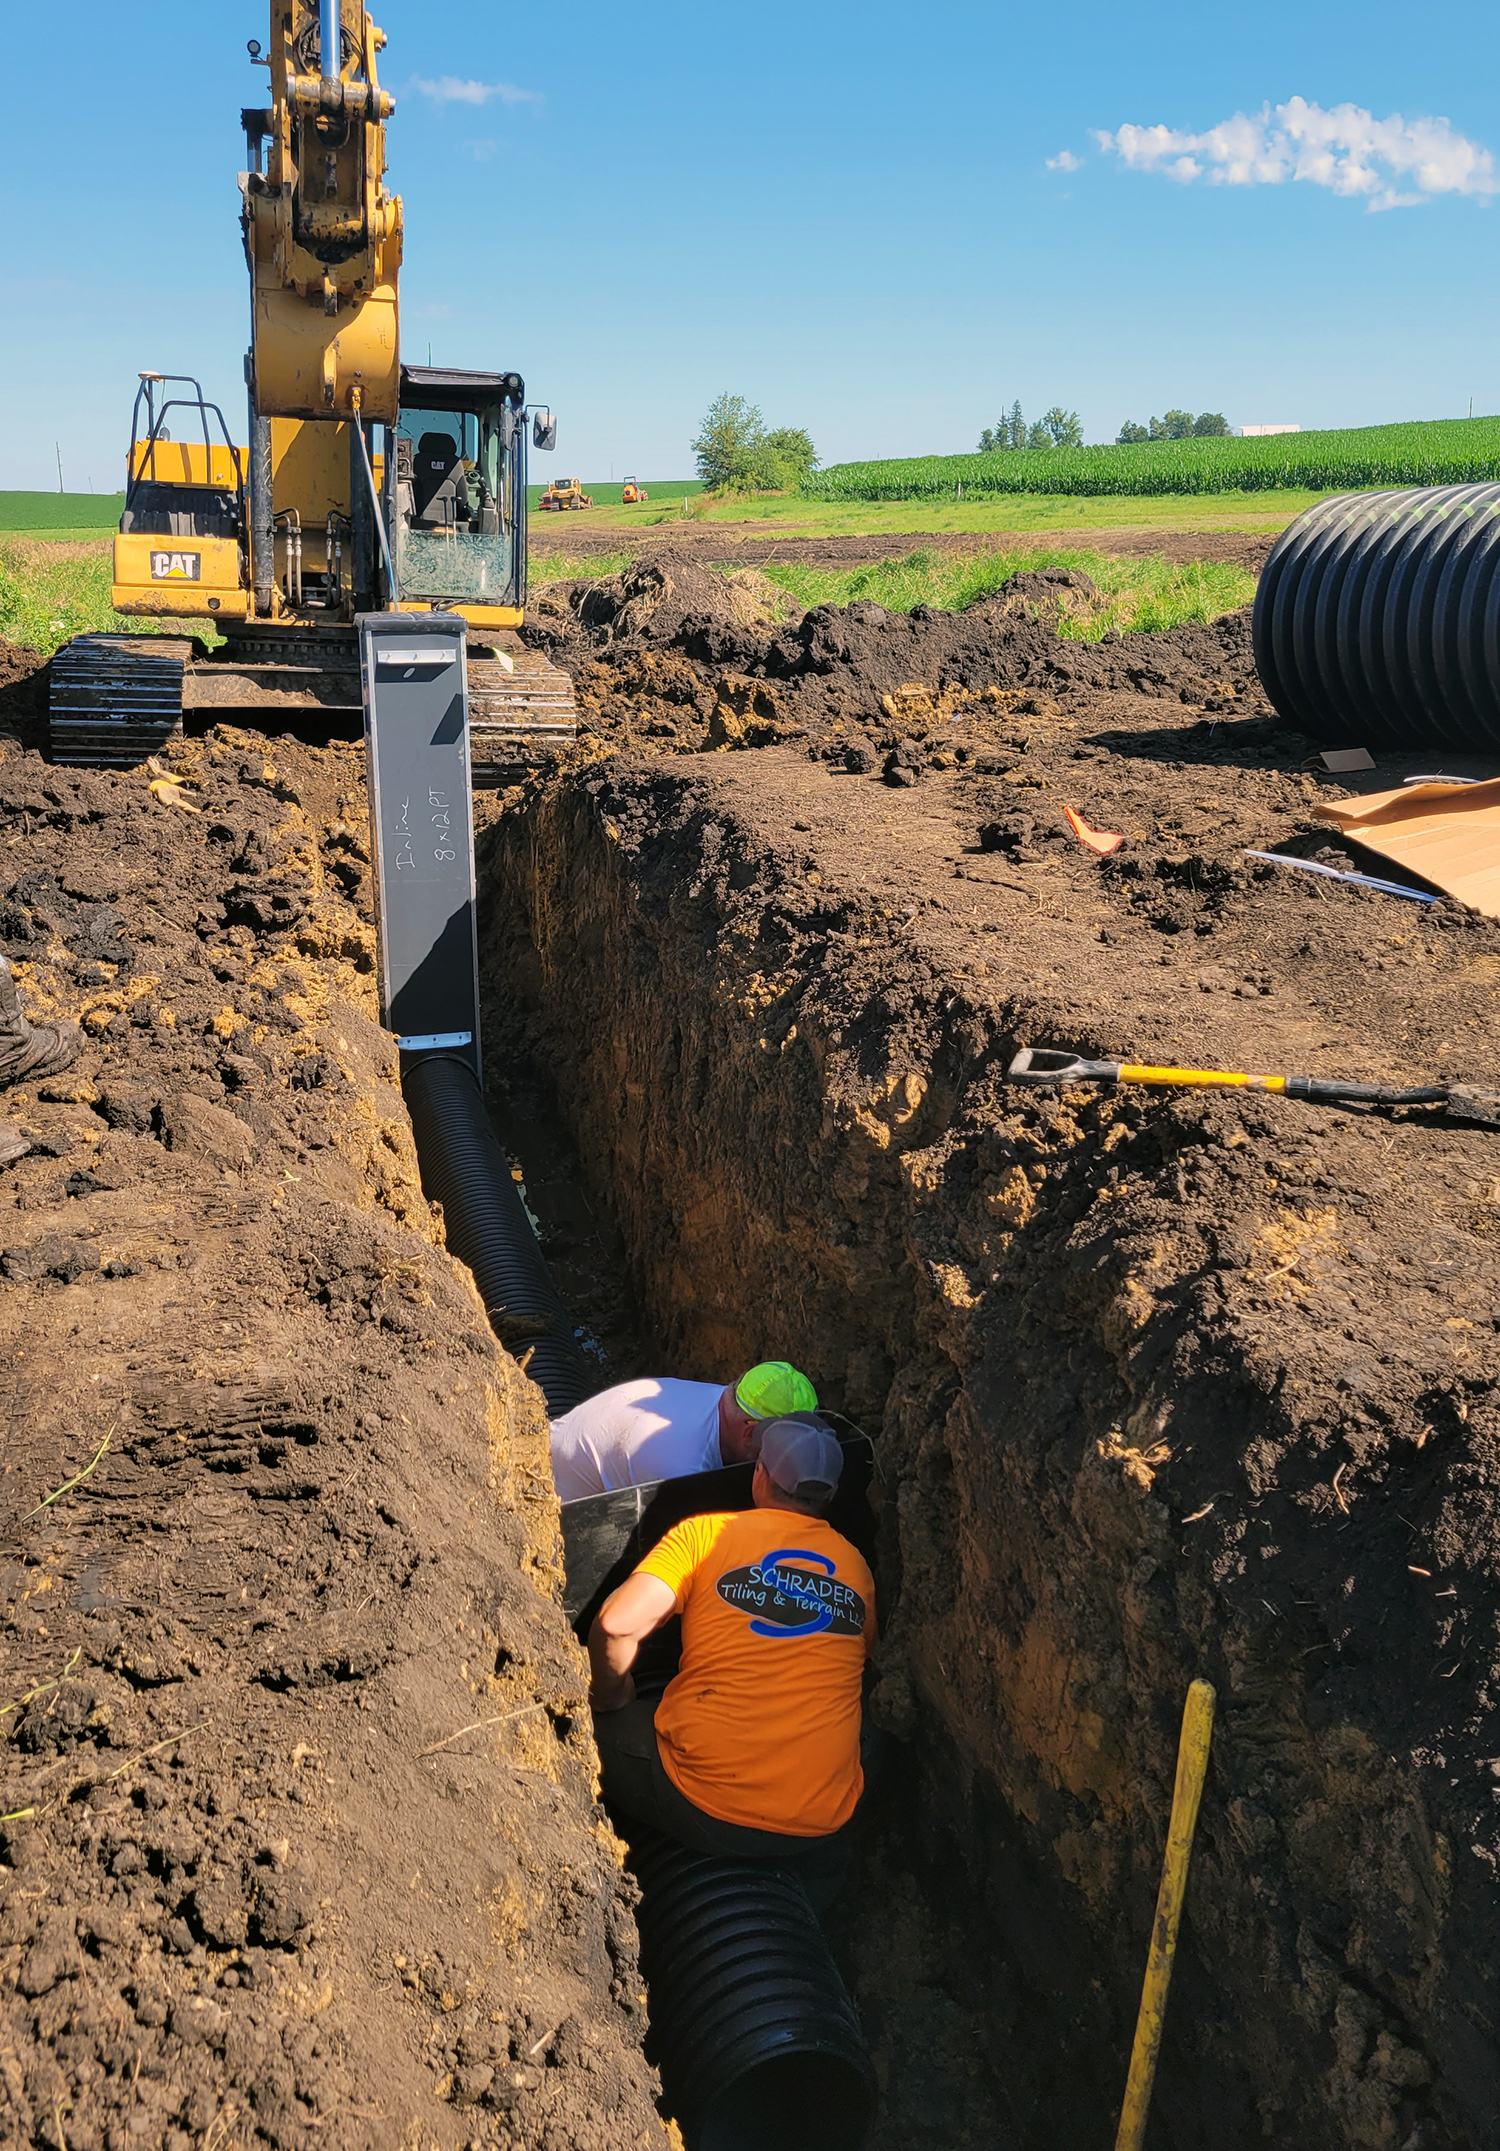 Two workers set a large pipe into a deep, earthen trench. The hose is connected to a saturated buffer control unit aboveground, with an excavator in the background.